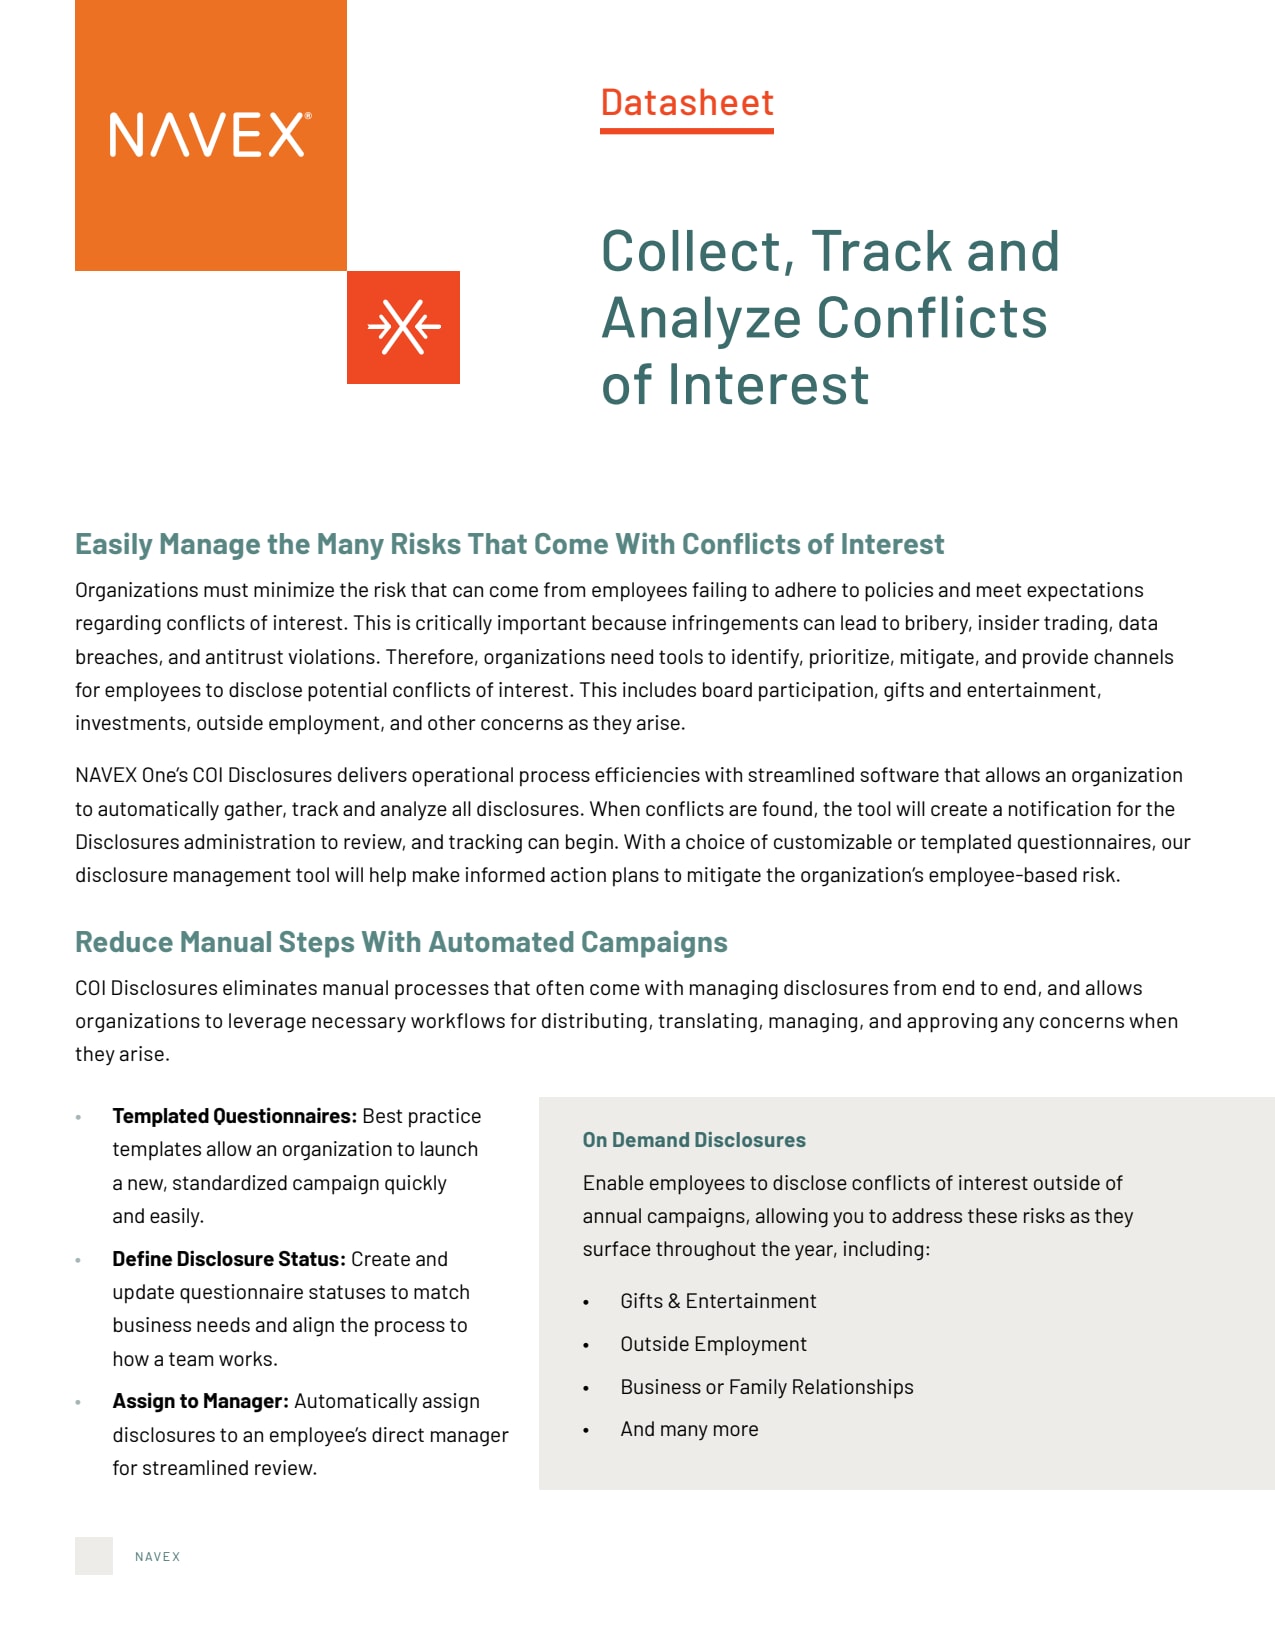 Datasheet: Collect, Track & Analyze Conflicts of Interest